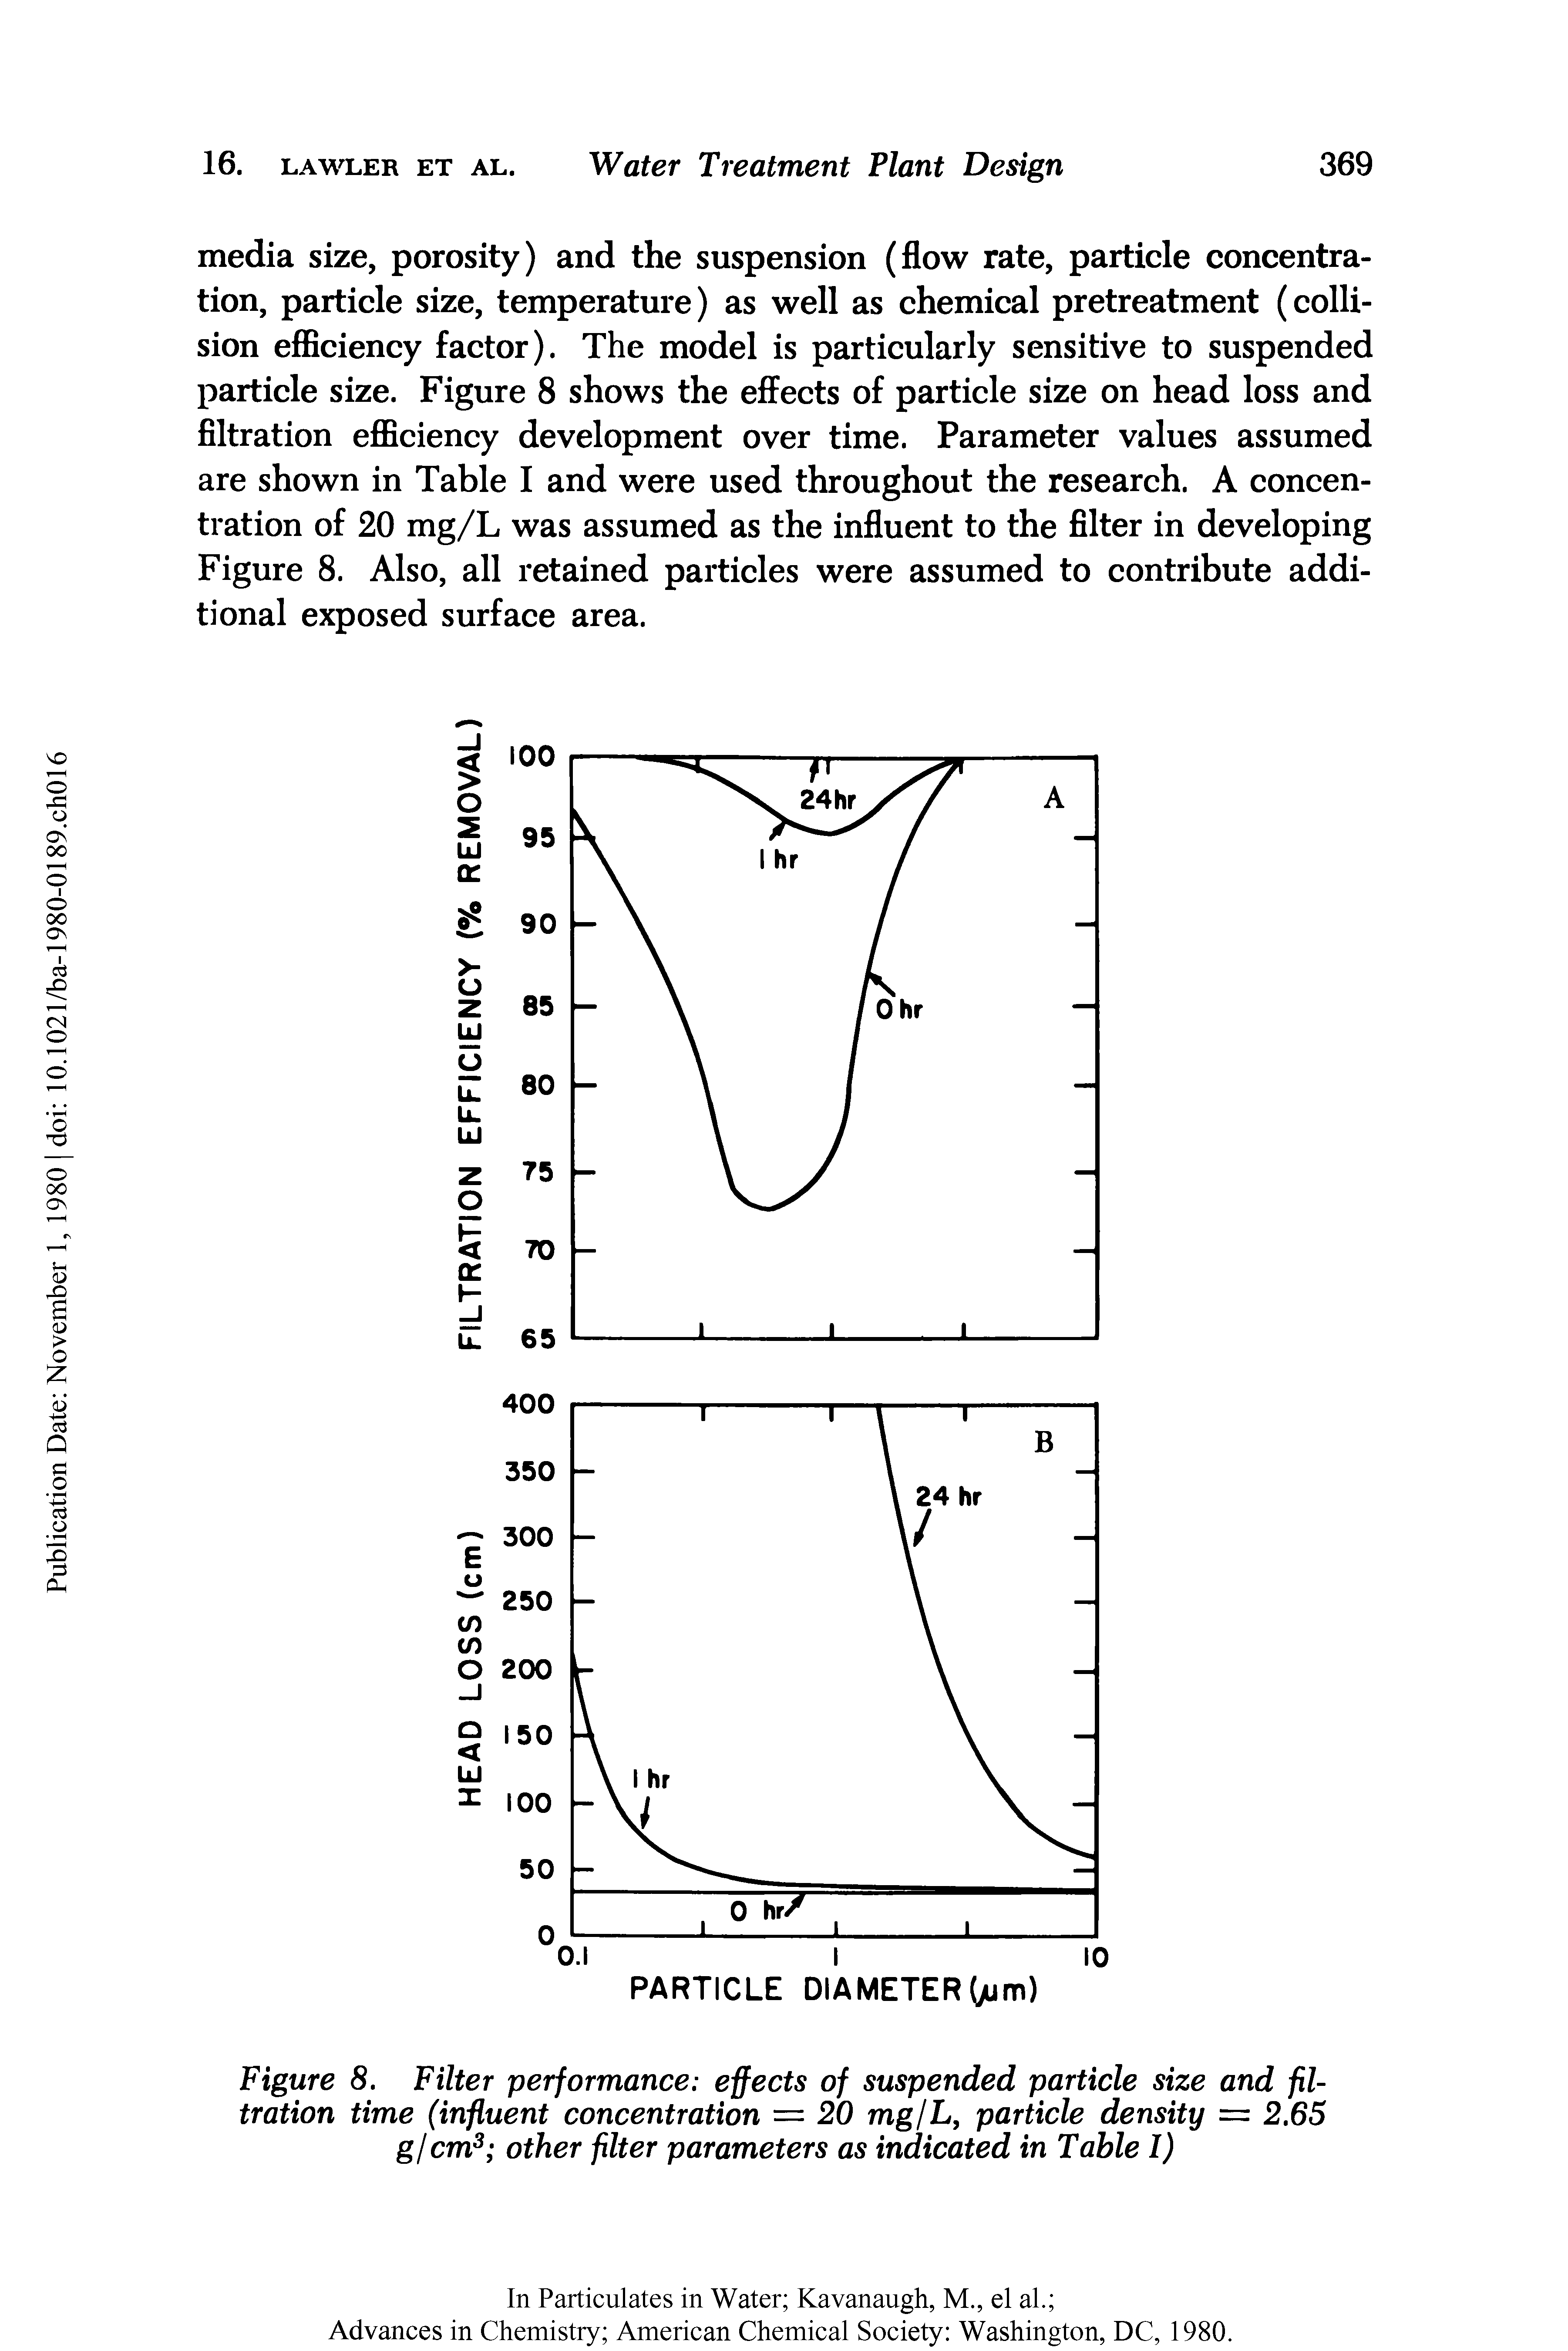 Figure 8. Filter performance effects of suspended particle size and filtration time (influent concentration = 20 mgjh, particle density = 2.65 g/cm other filter parameters as indicated in Table I)...